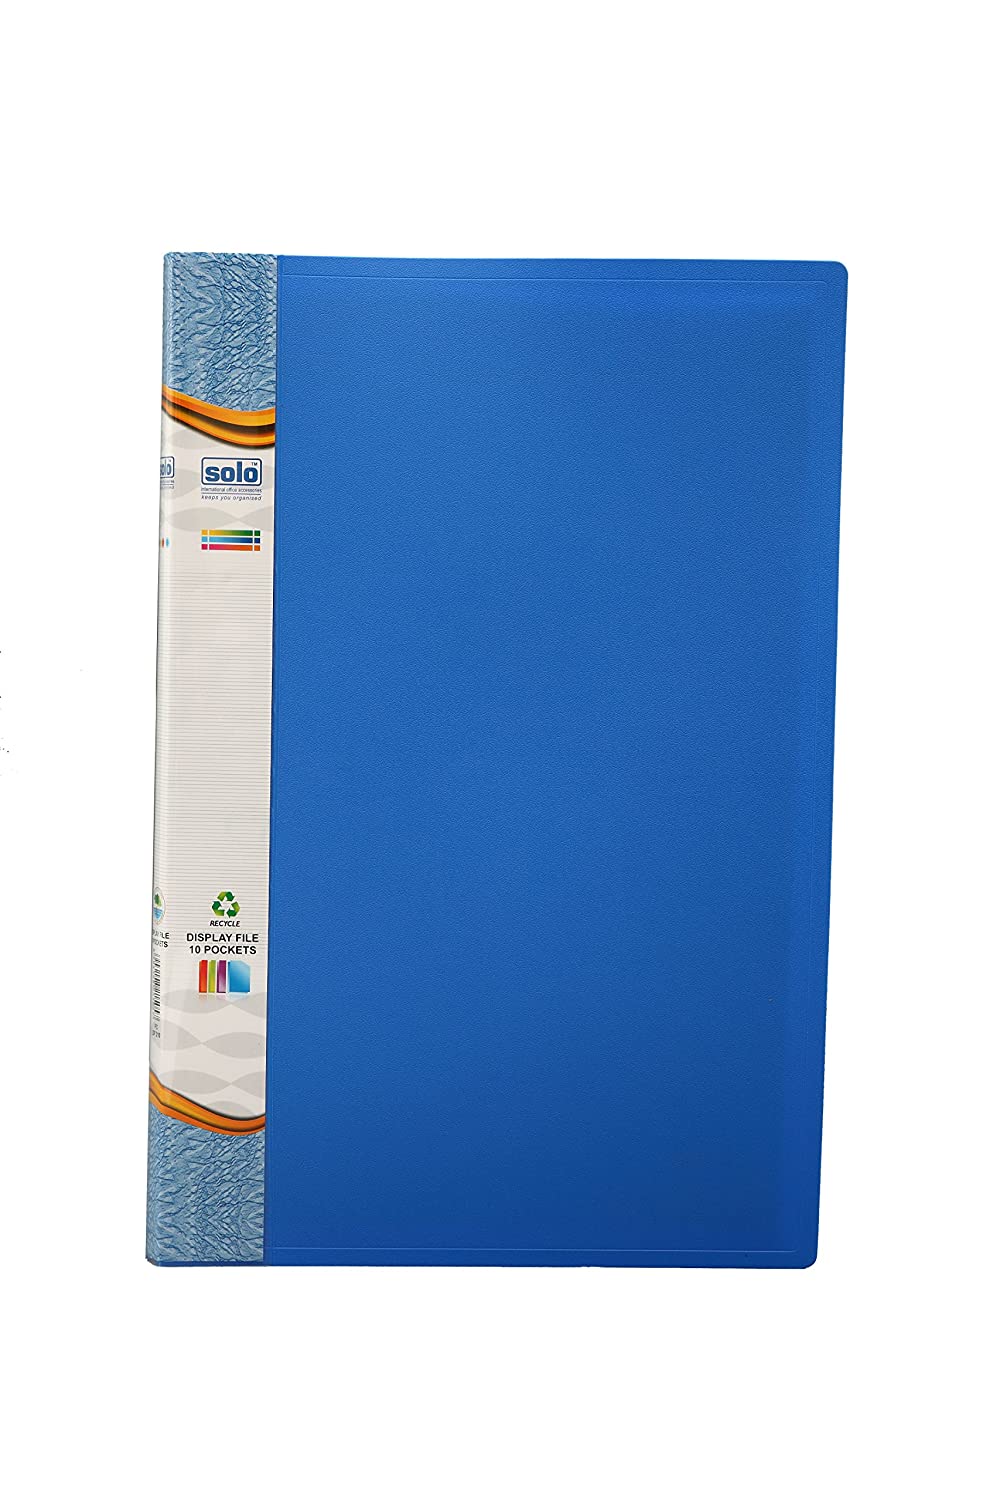 Solo DF210 Display File 10 Pockets Blue Pack of 10